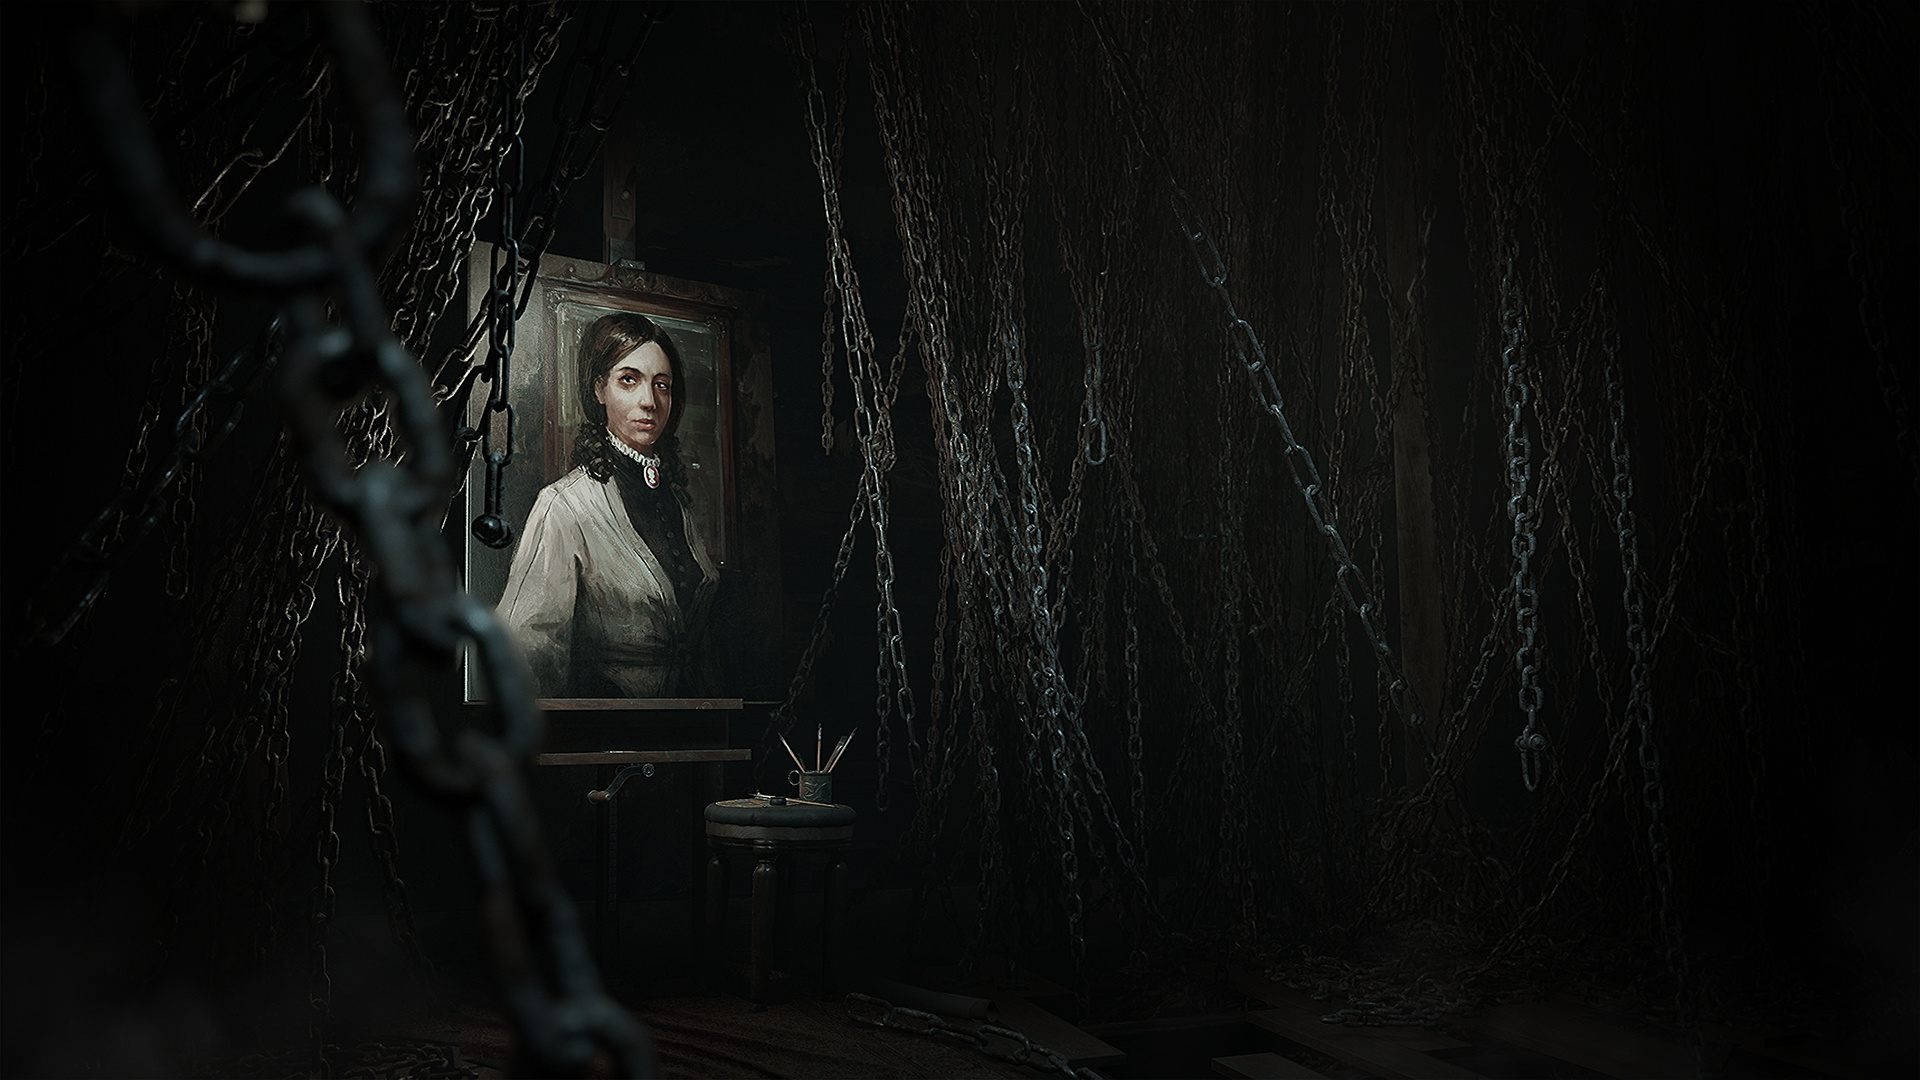 Layers Of Fear - Haunting Chained Portrait Background